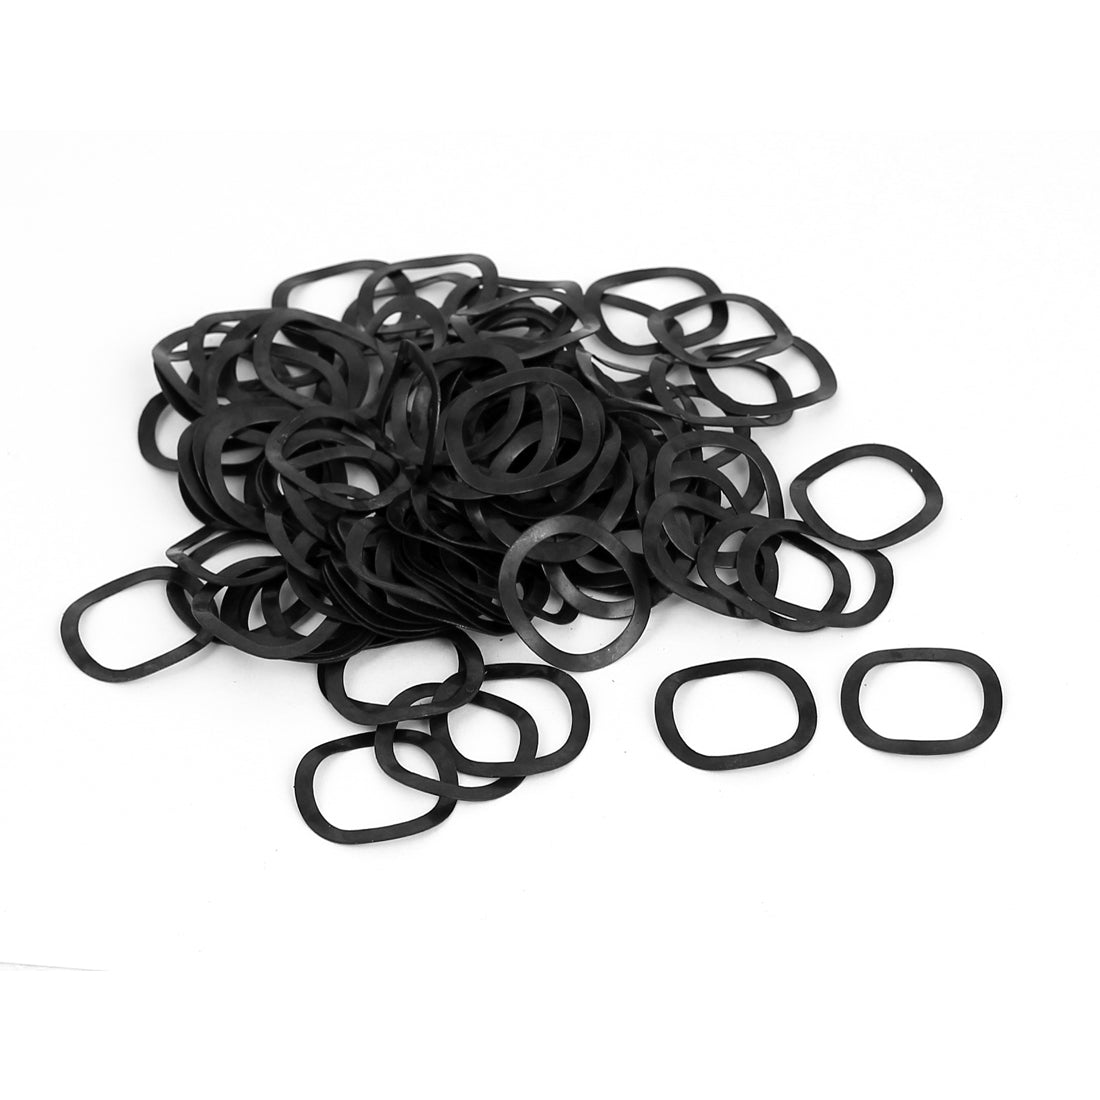 uxcell Uxcell 100pcs Black Metal Wavy Wave Crinkle Spring Washers M16 16mm x 21mm x 0.3mm